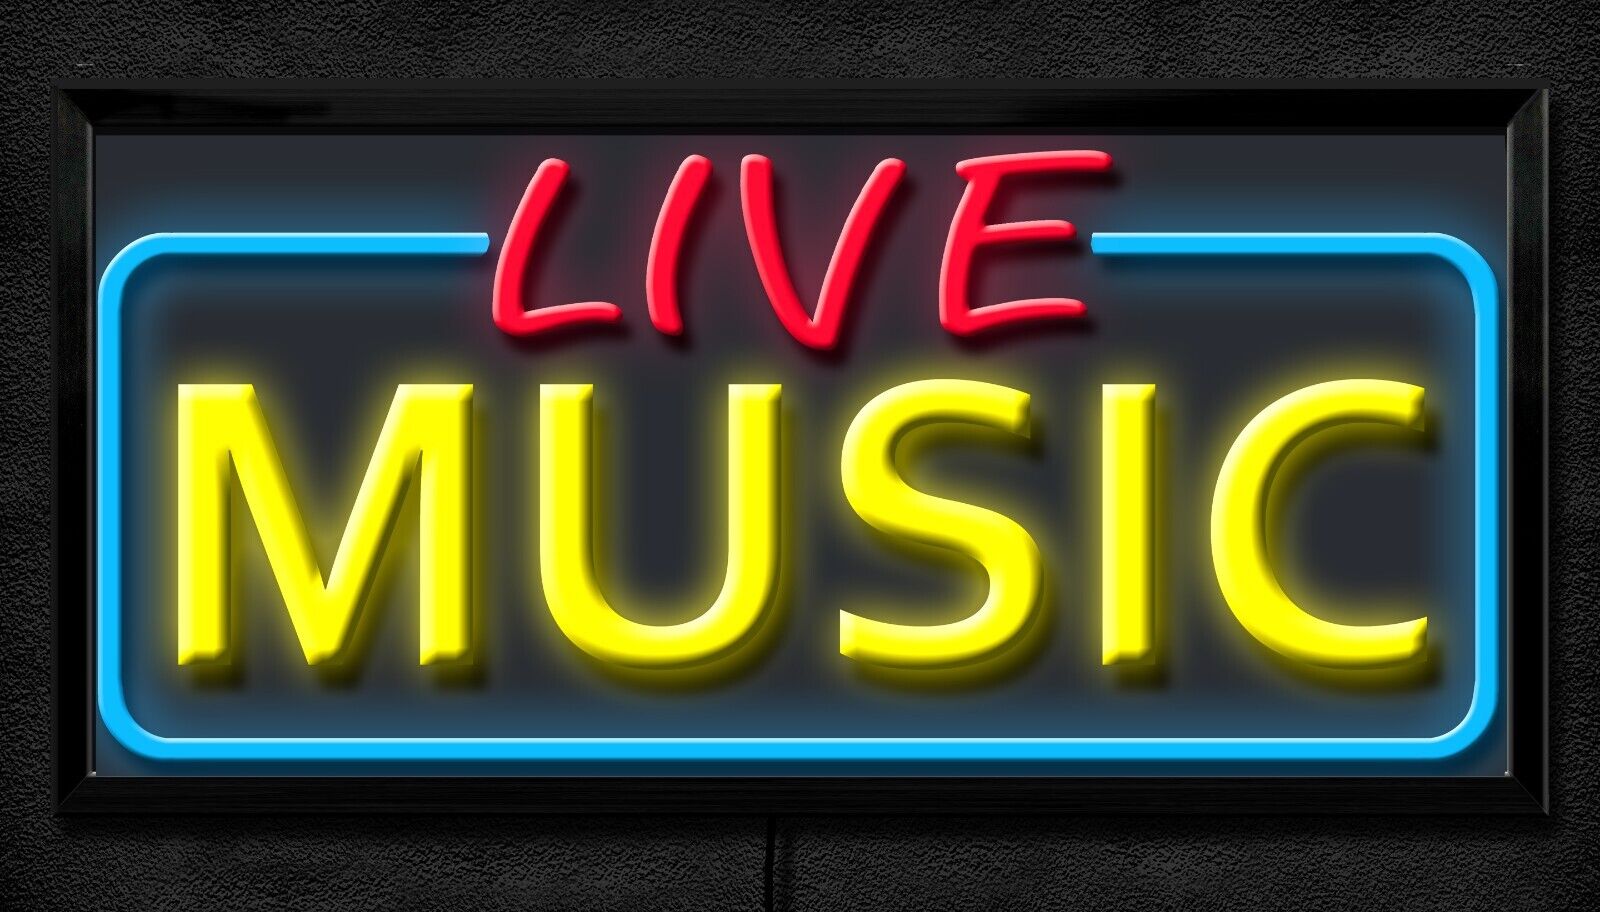 ULTRA BRIGHT LED LIGHTED LIVE MUSIC SIGN NEON STYLE / BAR SIGN